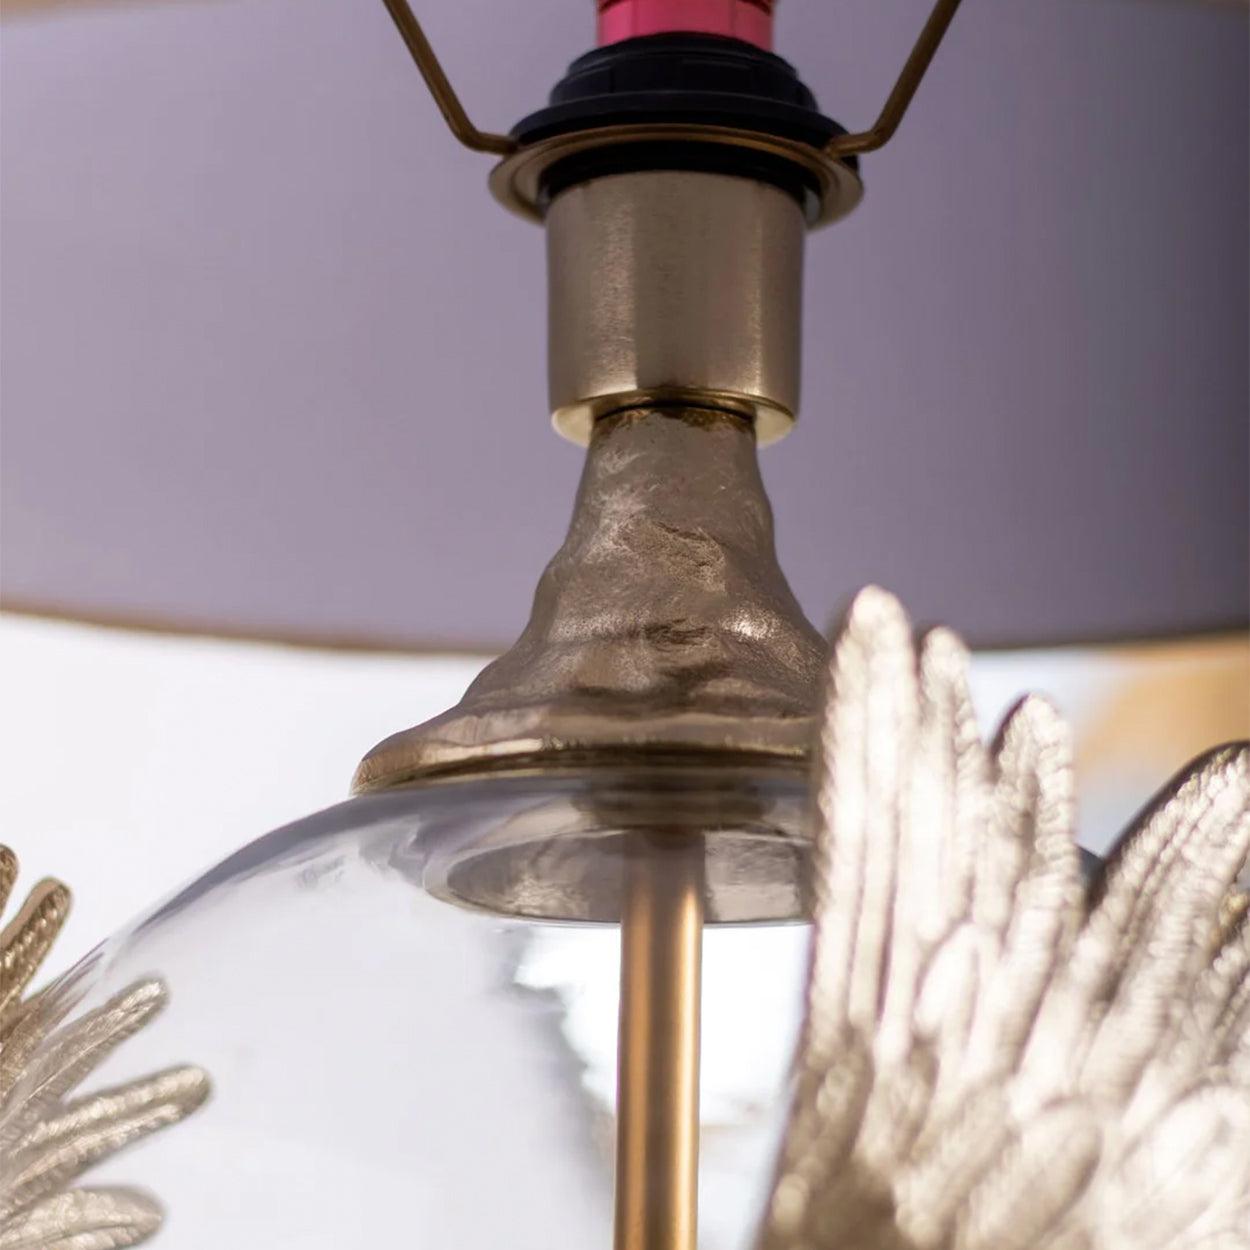 PHOENIX WING HAND MADE METAL AND GLASS TABLE LAMP - Ankur Lighting